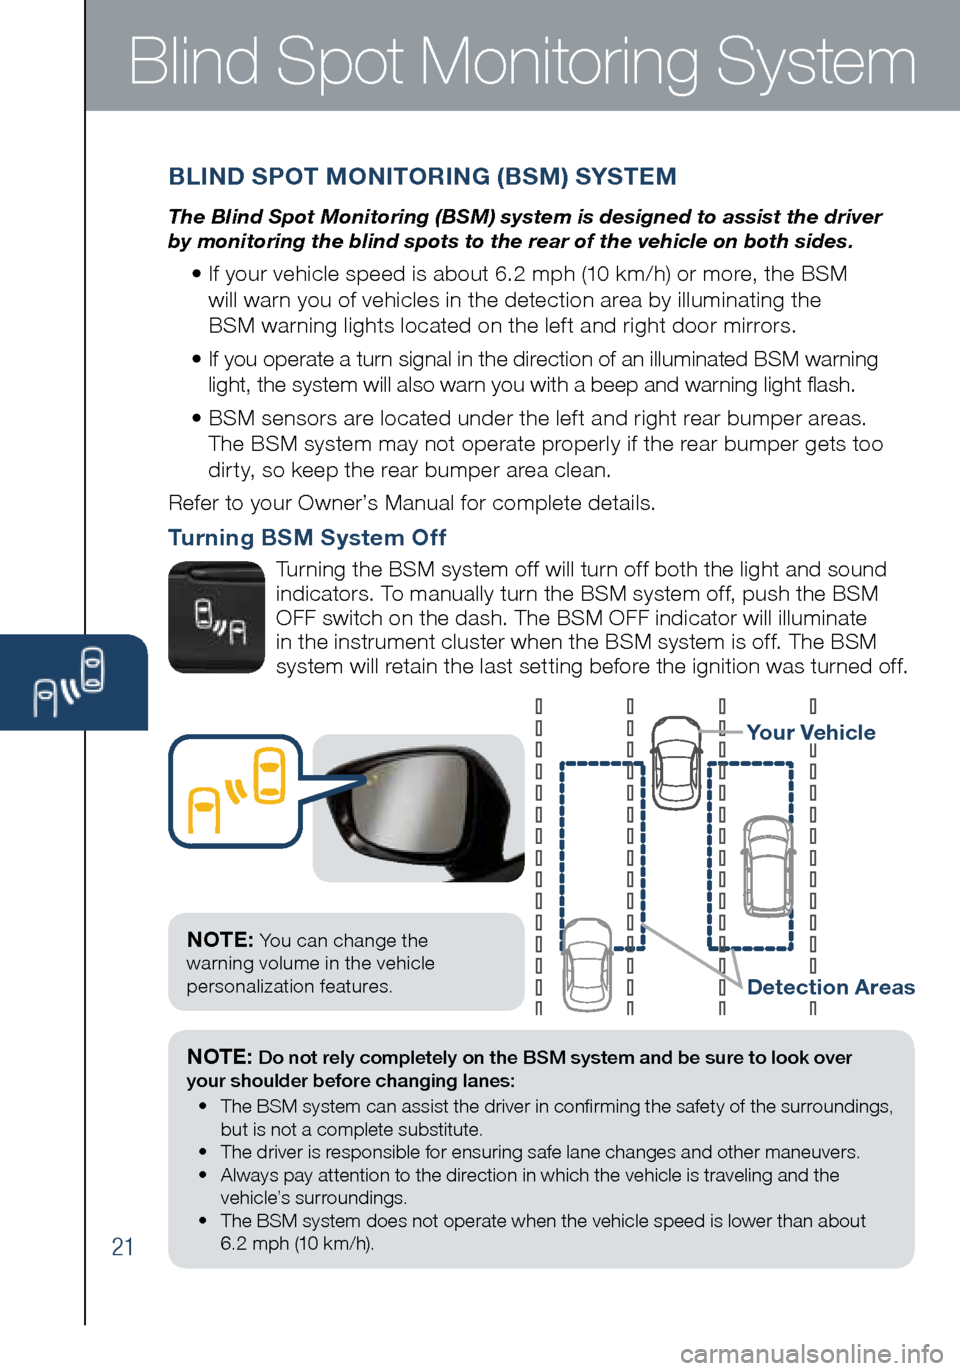 MAZDA MODEL MX-5 2016  Smart Start Guide (in English) 21
Blind Spot Monitoring System
NOTE: Do not rely completely on the BSM system and be sure to look over 
your shoulder before changing lanes: 
•    The BSM system can assist the driver in confirming